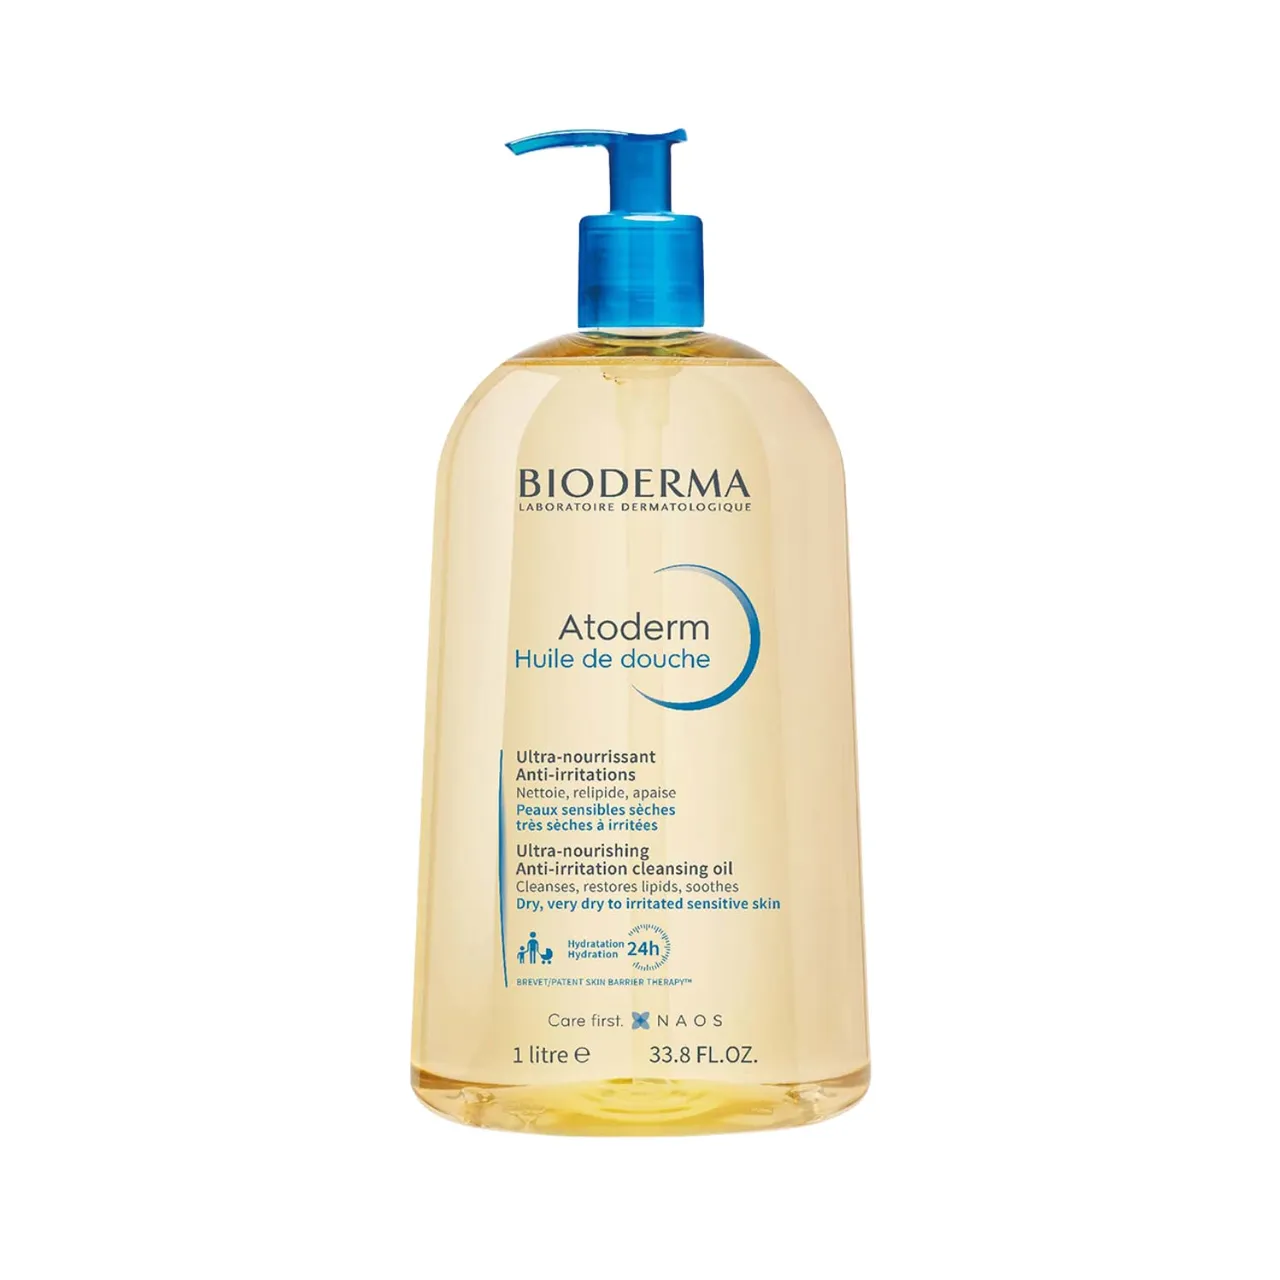 Bioderma Atoderm Shower Oil - Cleansing Oil Body Wash for